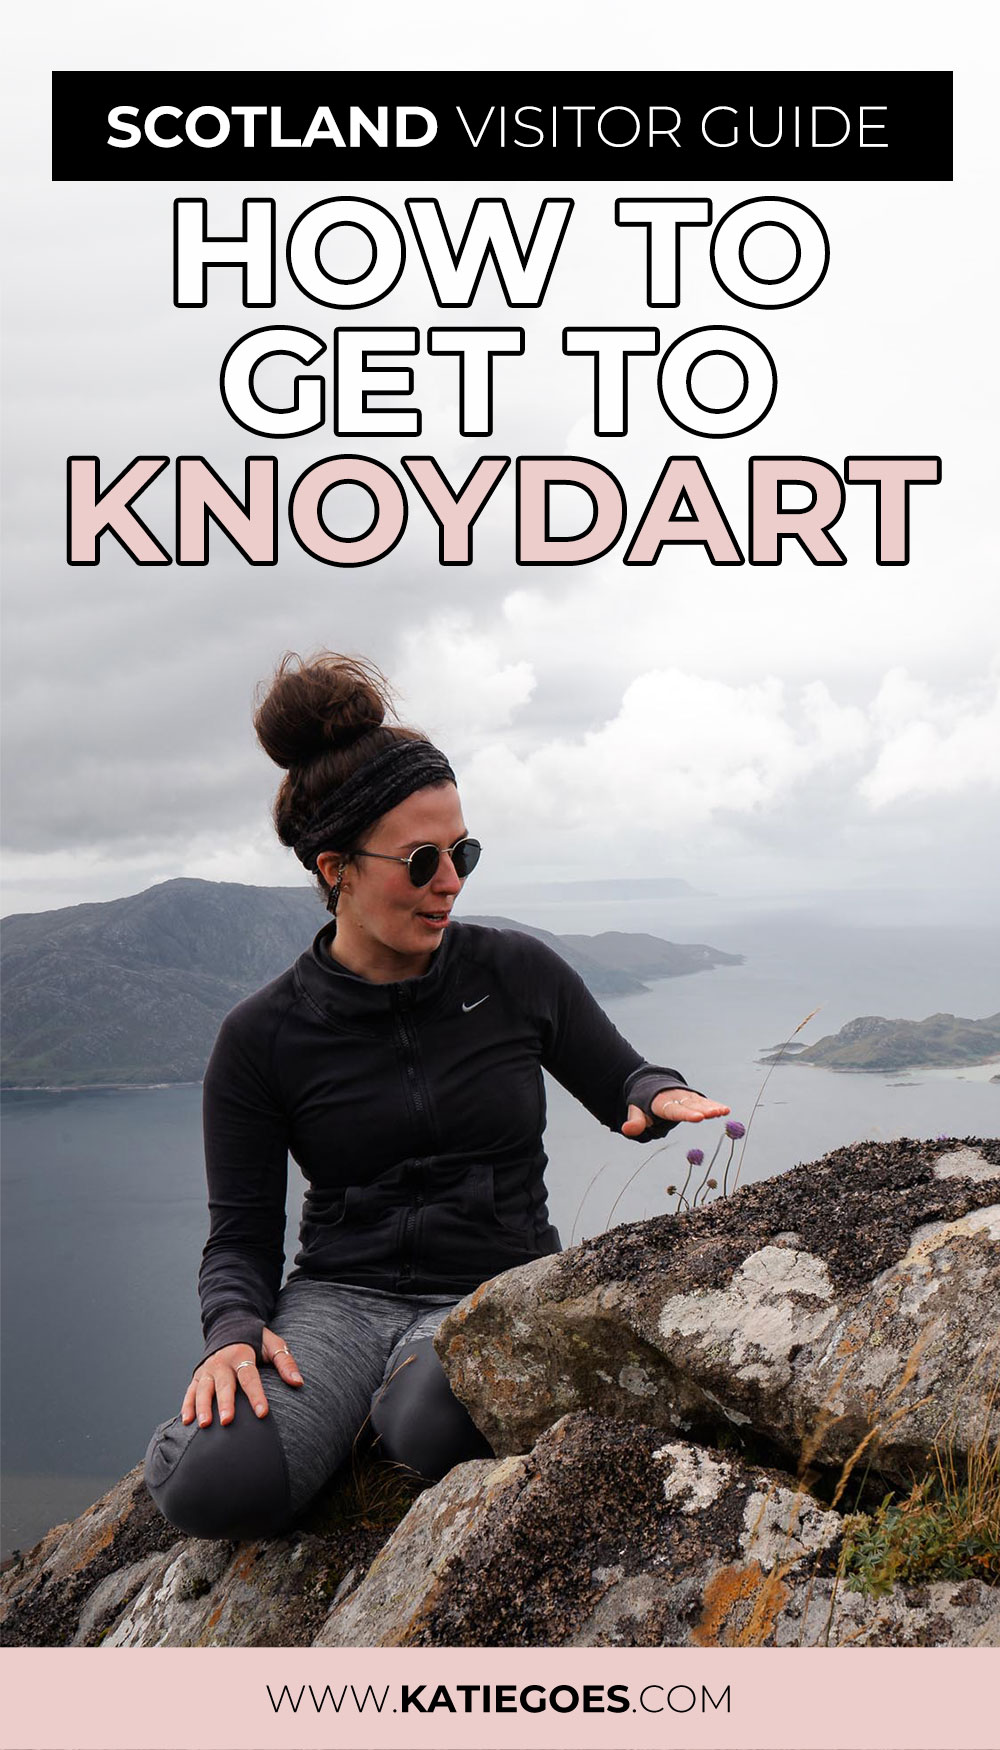 Knoydart Scotland: Scotland's Visitor Guide on How to Get to Knoydart